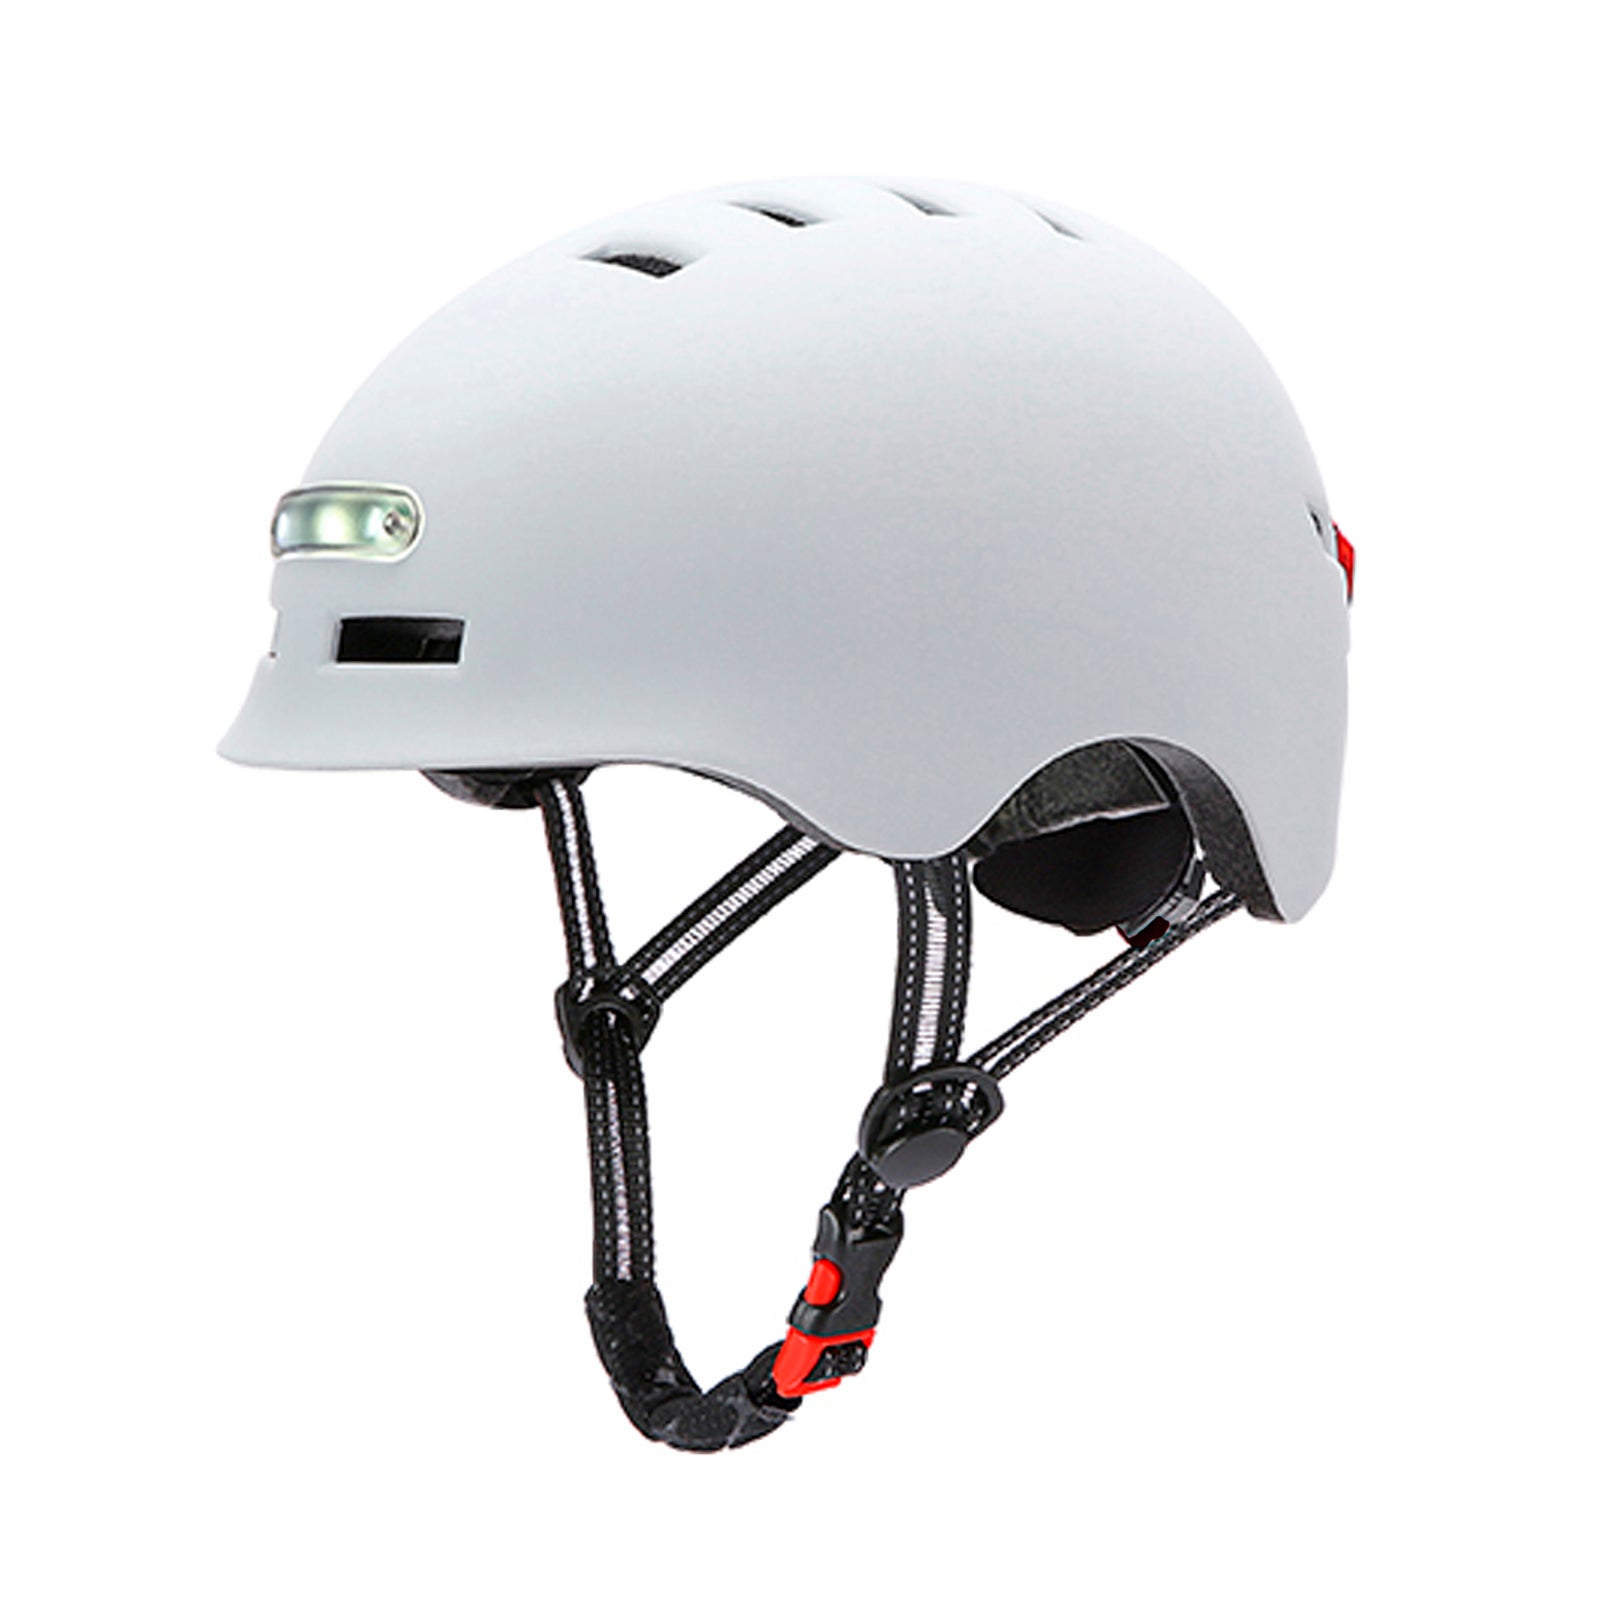 White Sports Bicycle Helmets Safety Head Protection LED Night Warning Light Adjustable 54-61cm/M